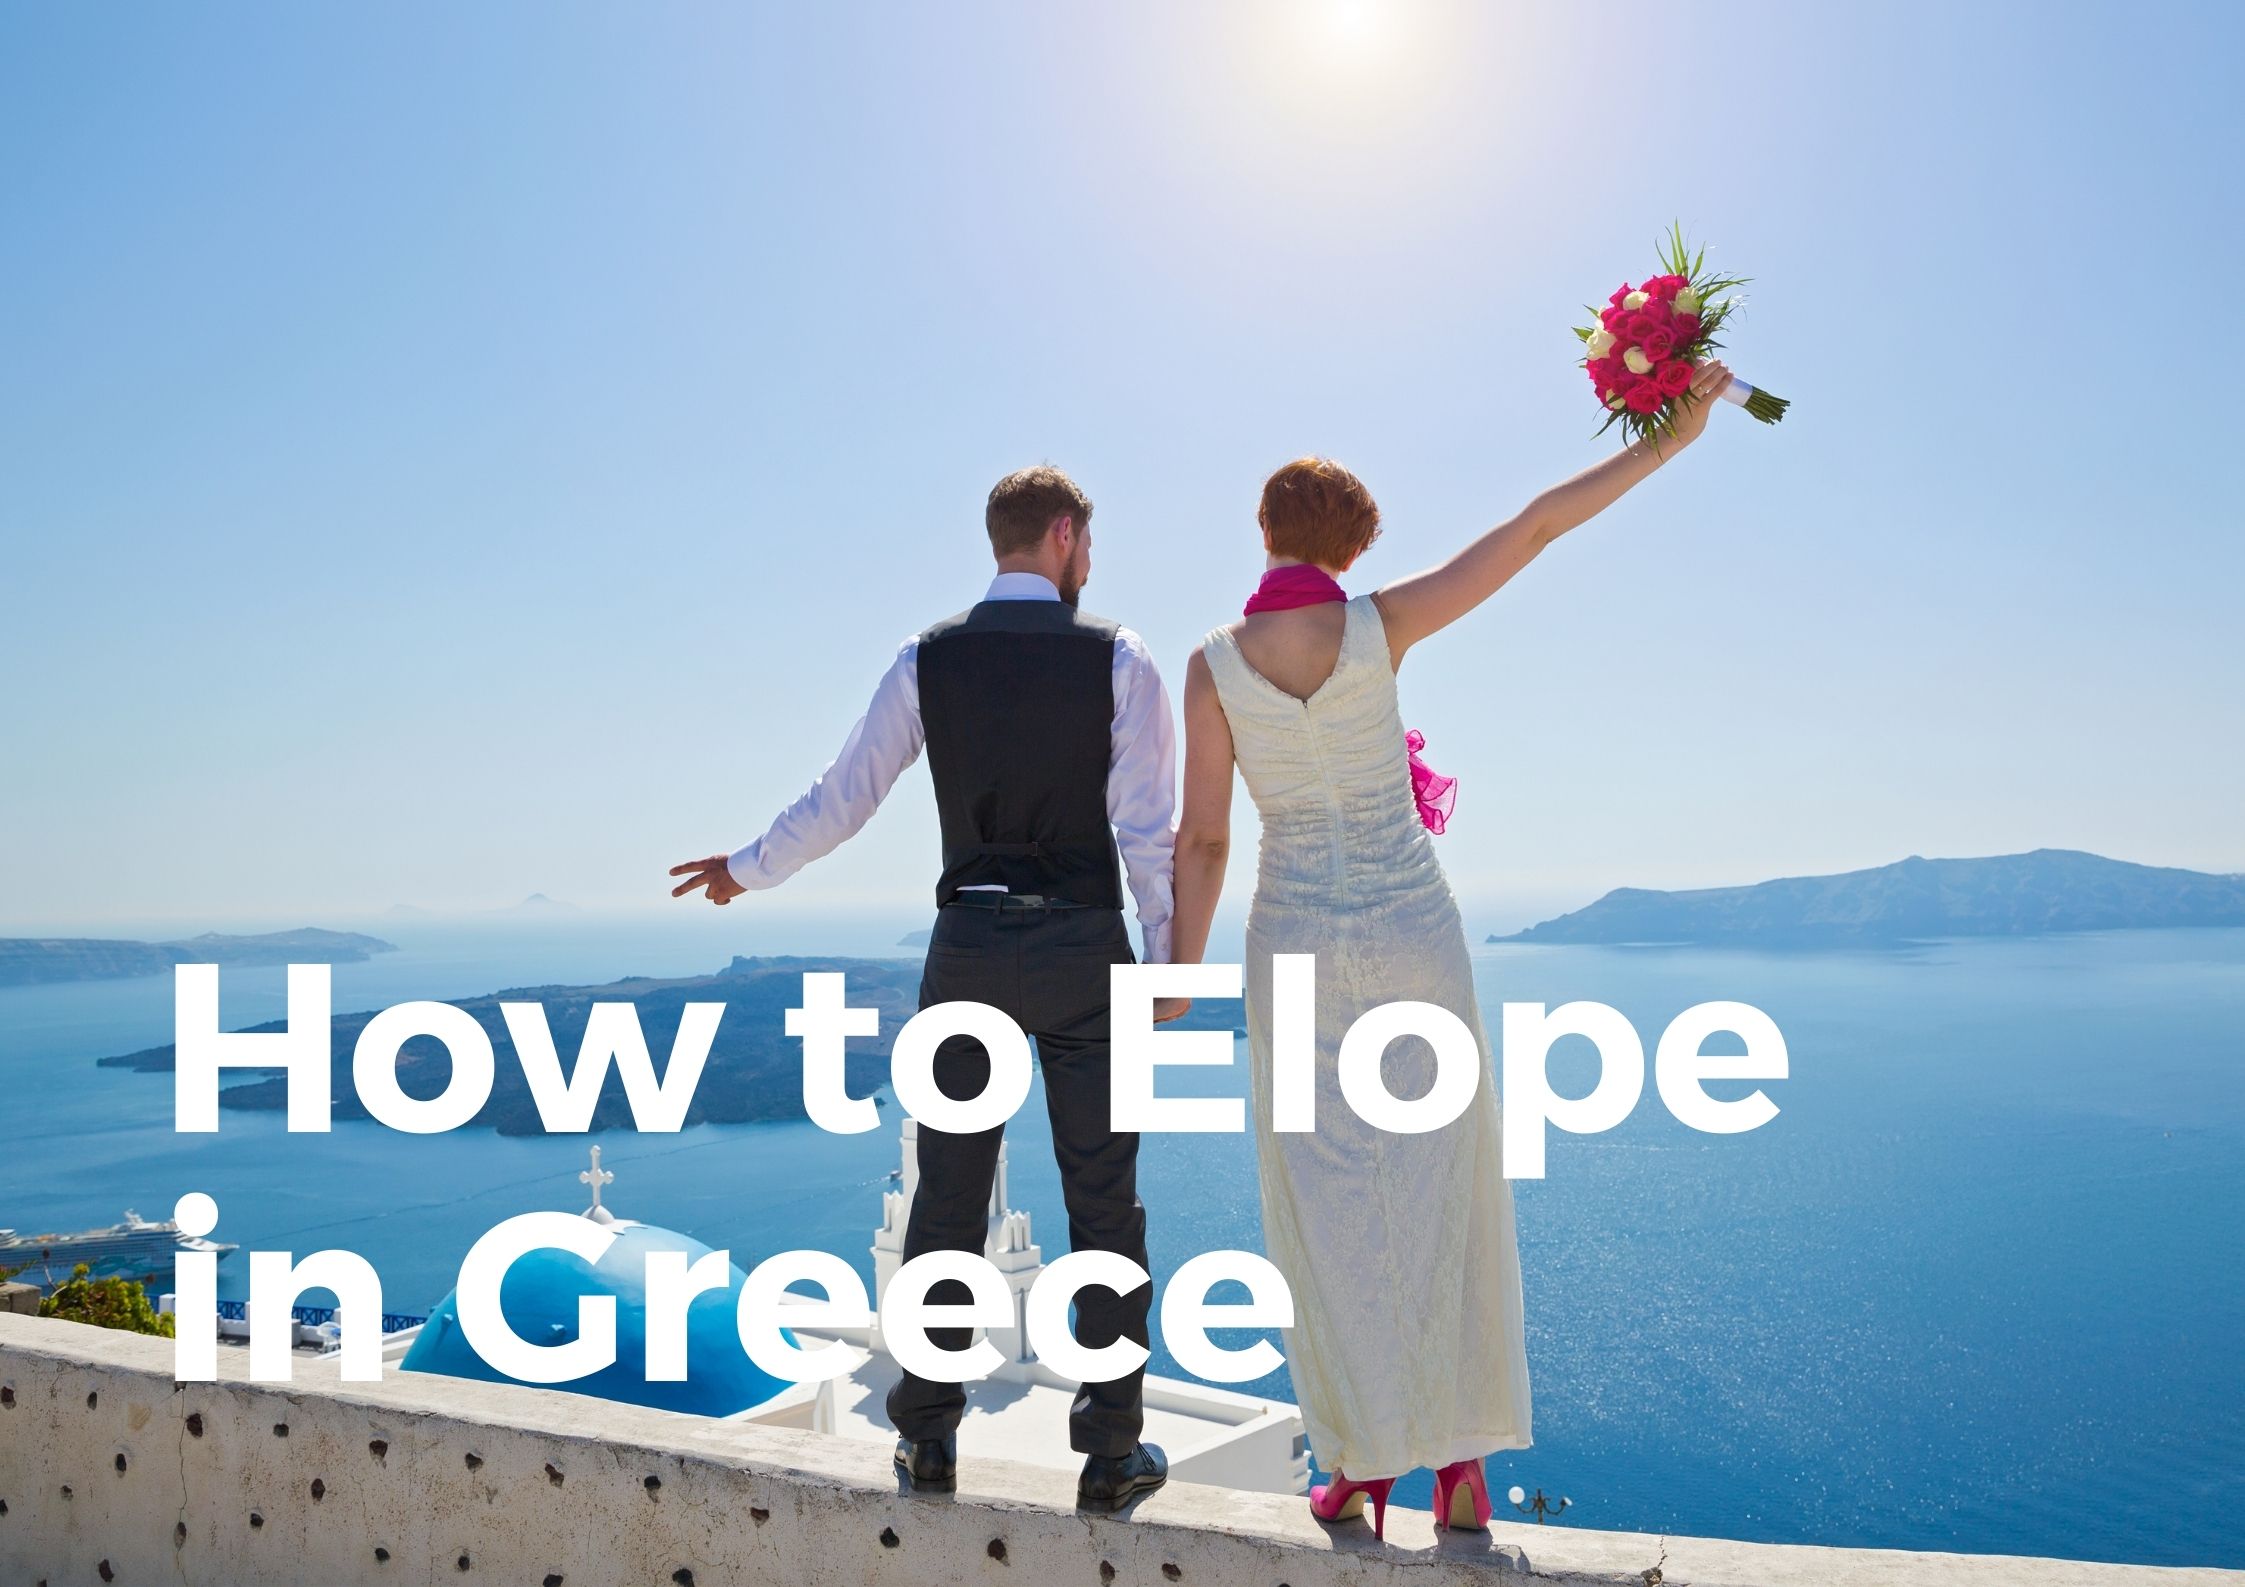 How to elope in Greece